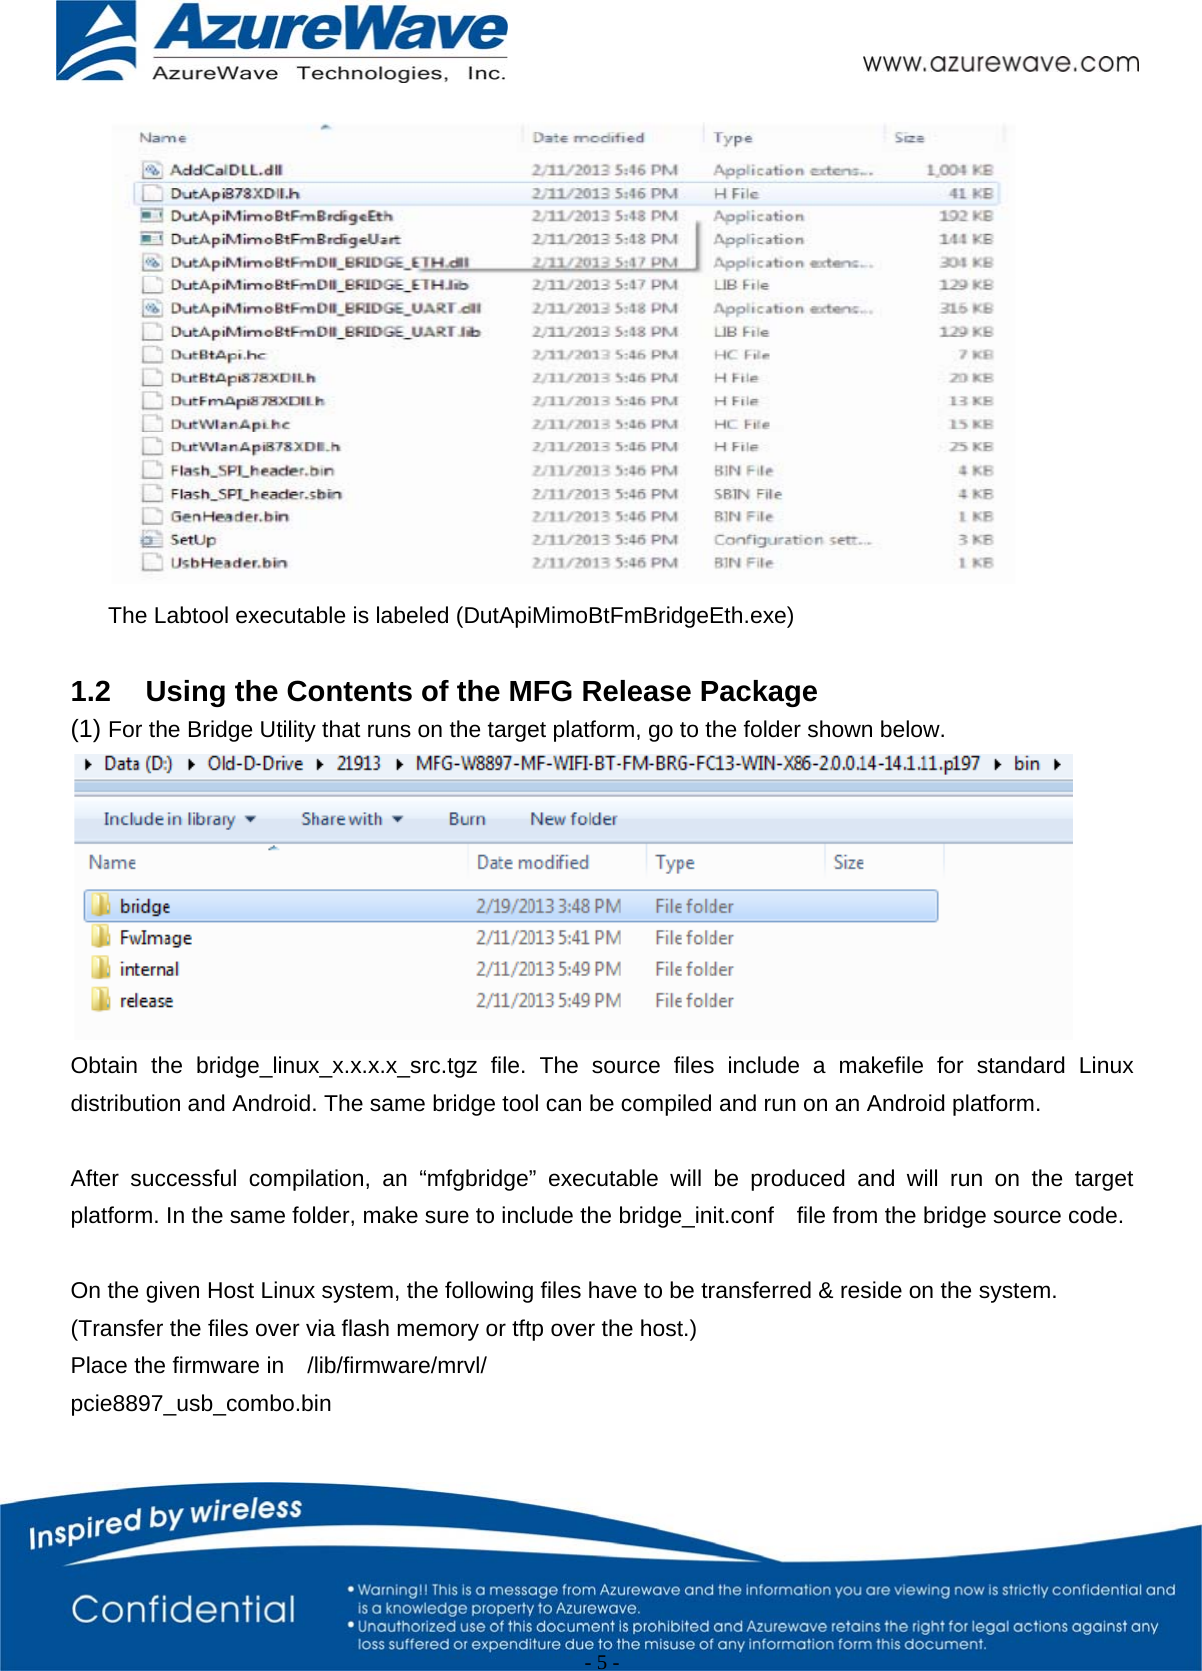                                                   - 5 -    The Labtool executable is labeled (DutApiMimoBtFmBridgeEth.exe)  1.2  Using the Contents of the MFG Release Package (1) For the Bridge Utility that runs on the target platform, go to the folder shown below.  Obtain the bridge_linux_x.x.x.x_src.tgz file. The source files include a makefile for standard Linux distribution and Android. The same bridge tool can be compiled and run on an Android platform.  After successful compilation, an “mfgbridge” executable will be produced and will run on the target platform. In the same folder, make sure to include the bridge_init.conf    file from the bridge source code.  On the given Host Linux system, the following files have to be transferred &amp; reside on the system. (Transfer the files over via flash memory or tftp over the host.) Place the firmware in  /lib/firmware/mrvl/   pcie8897_usb_combo.bin      